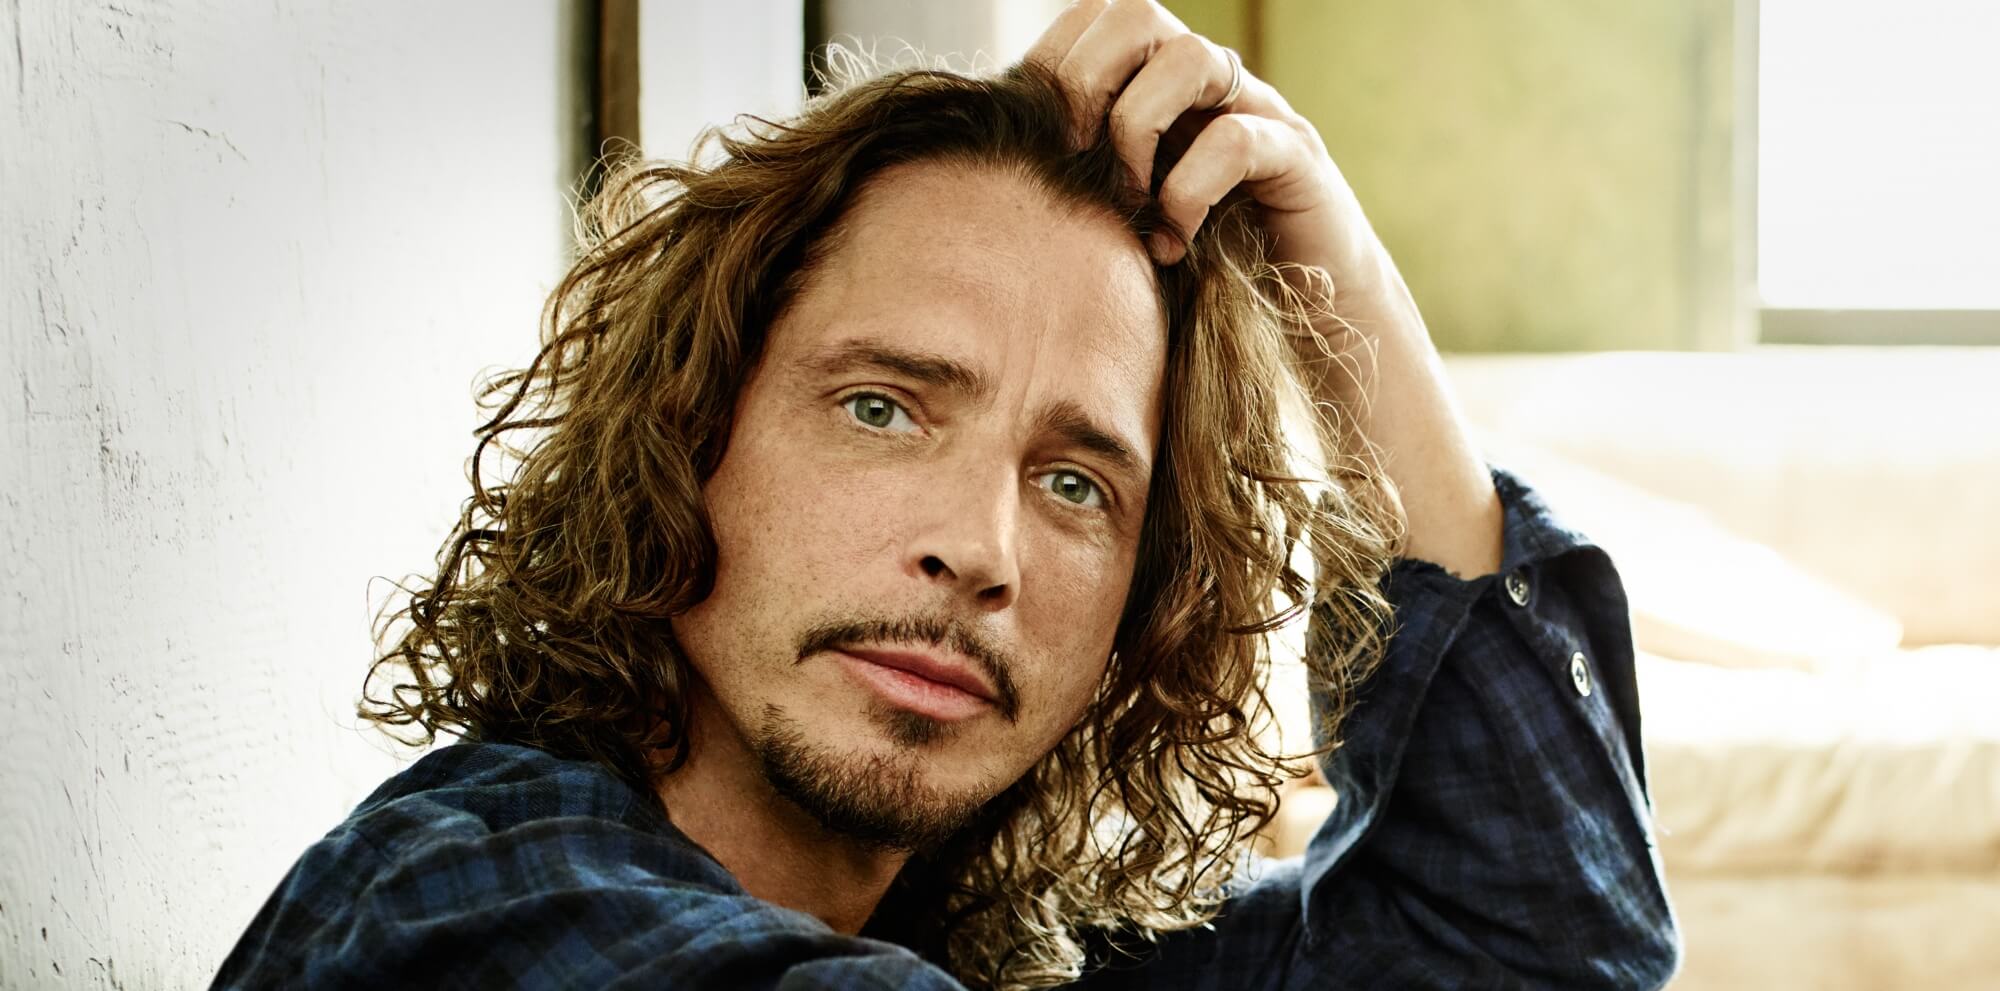 Survival Pictures Releases “The Promise” Chris Cornell ’s Last Release